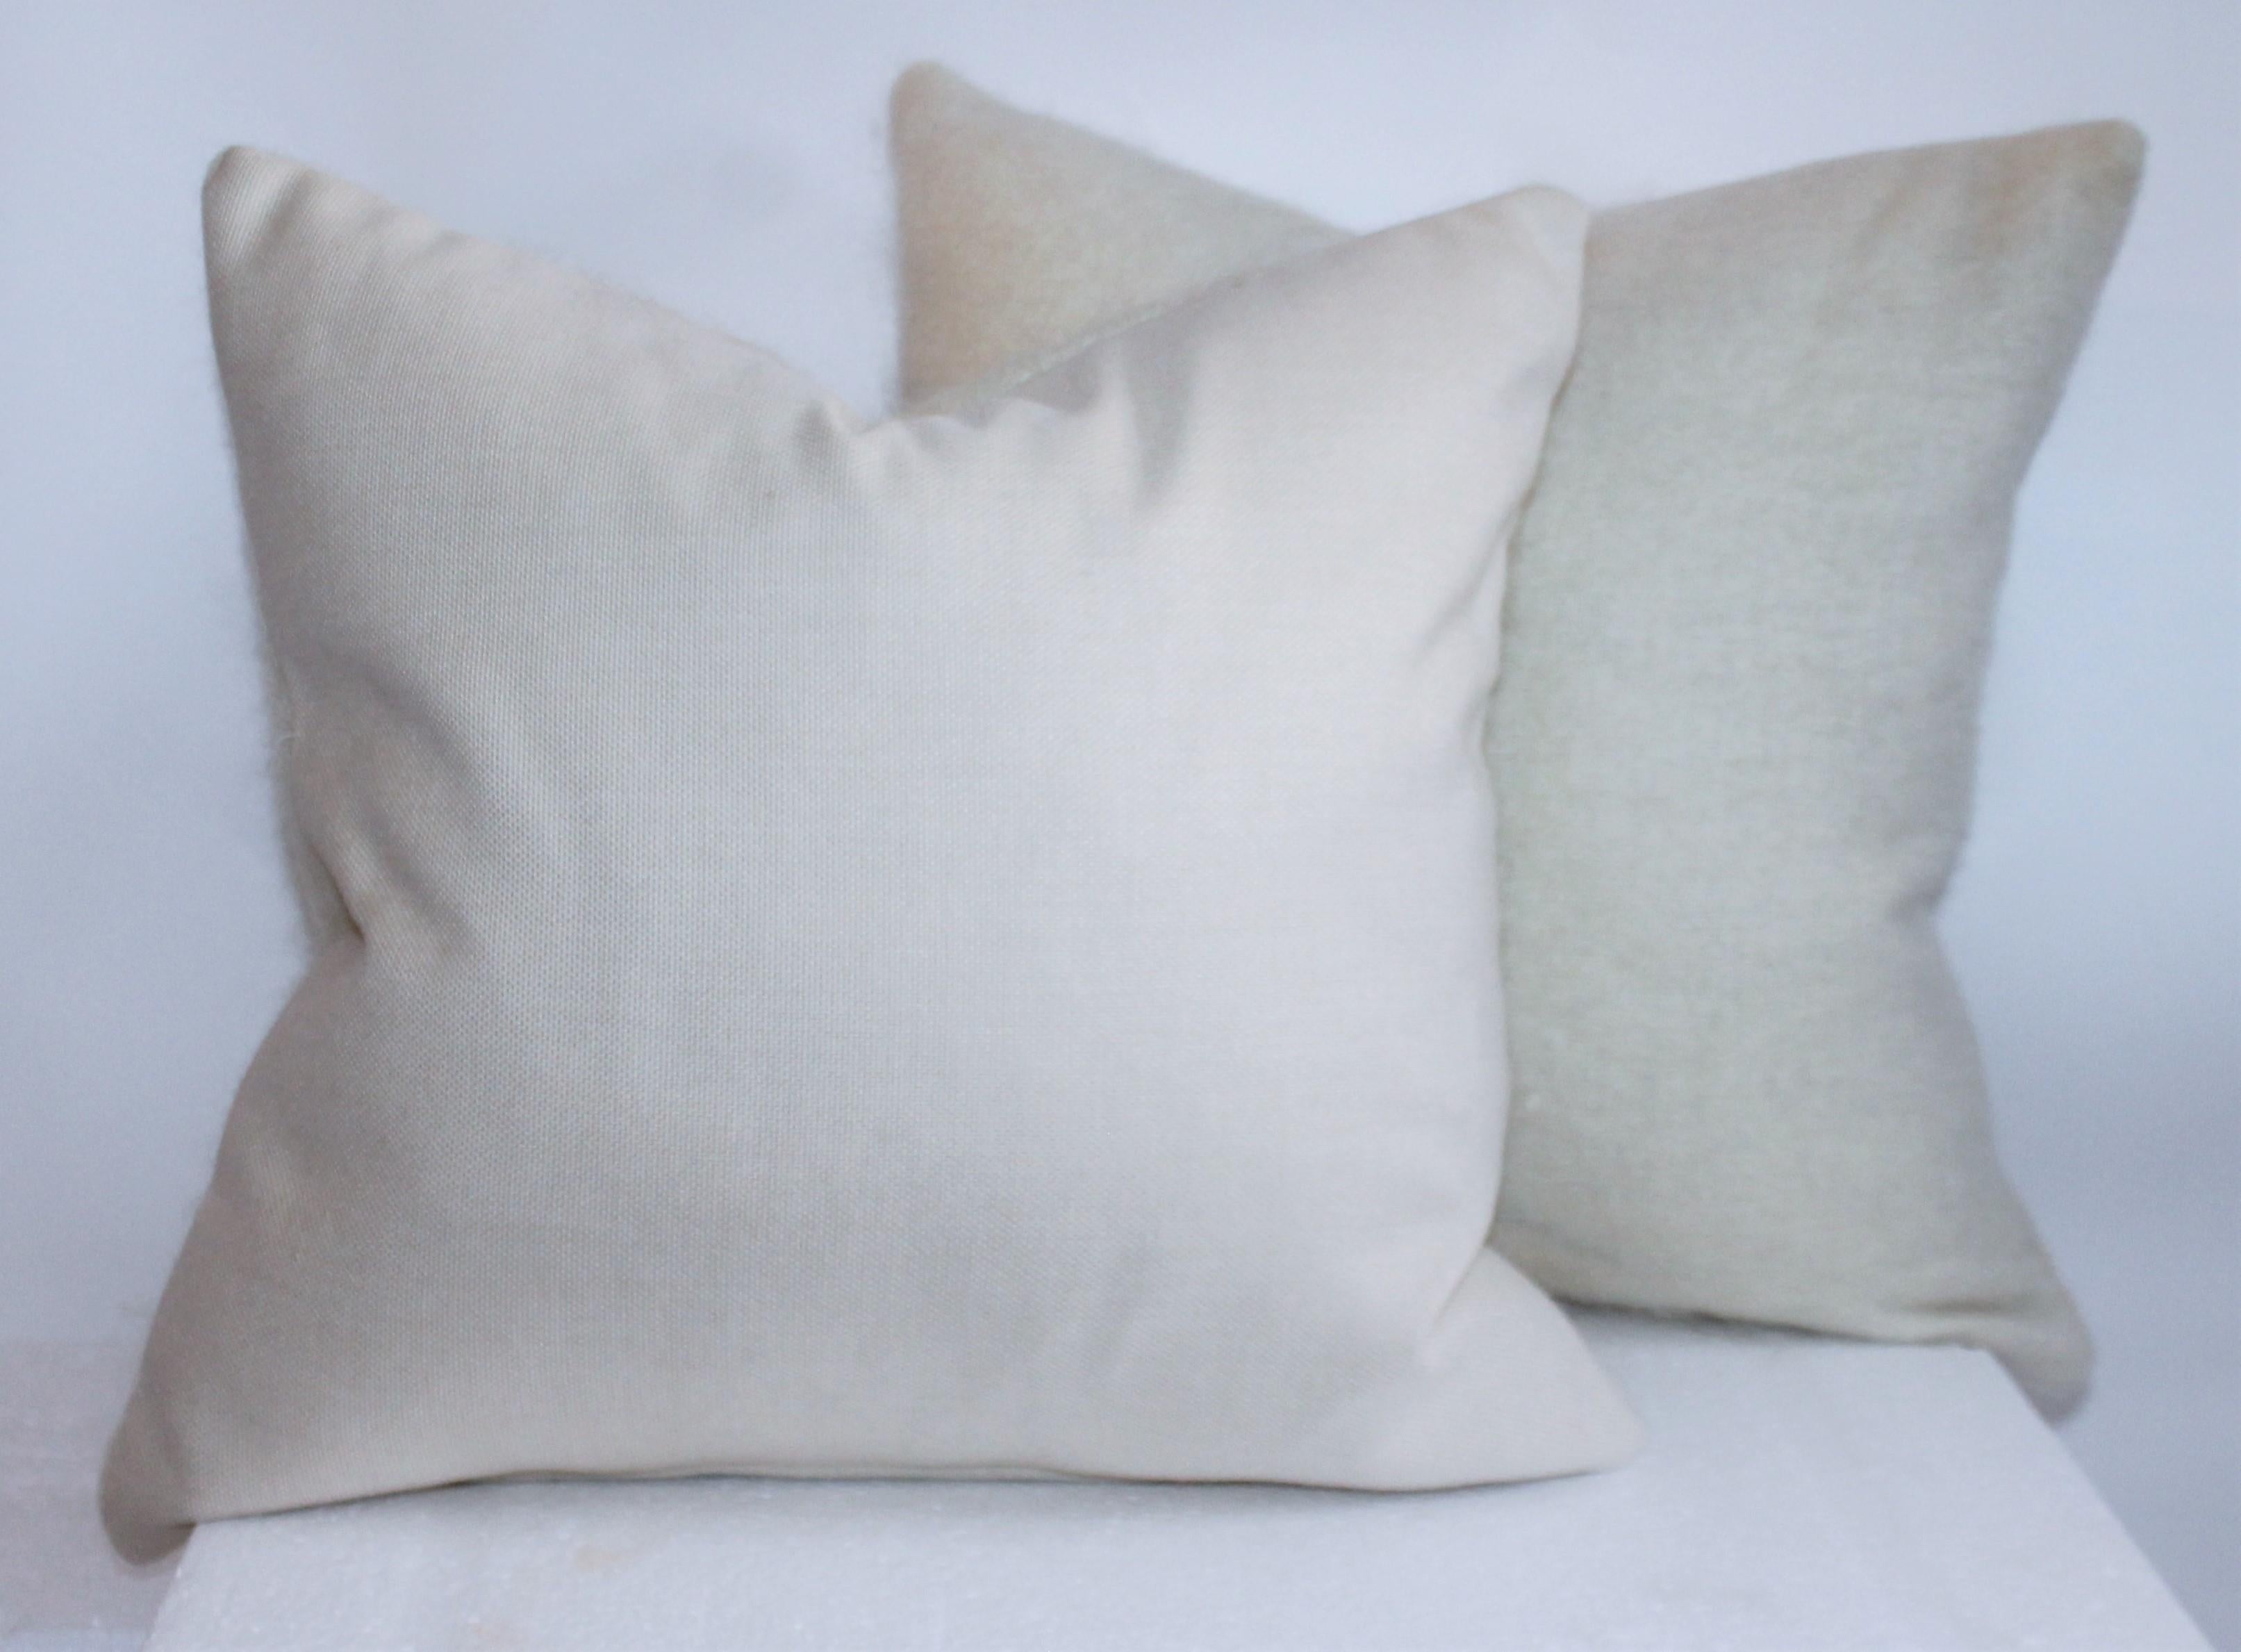 American Amazing Lambs Wool Pillows, Two Pairs For Sale